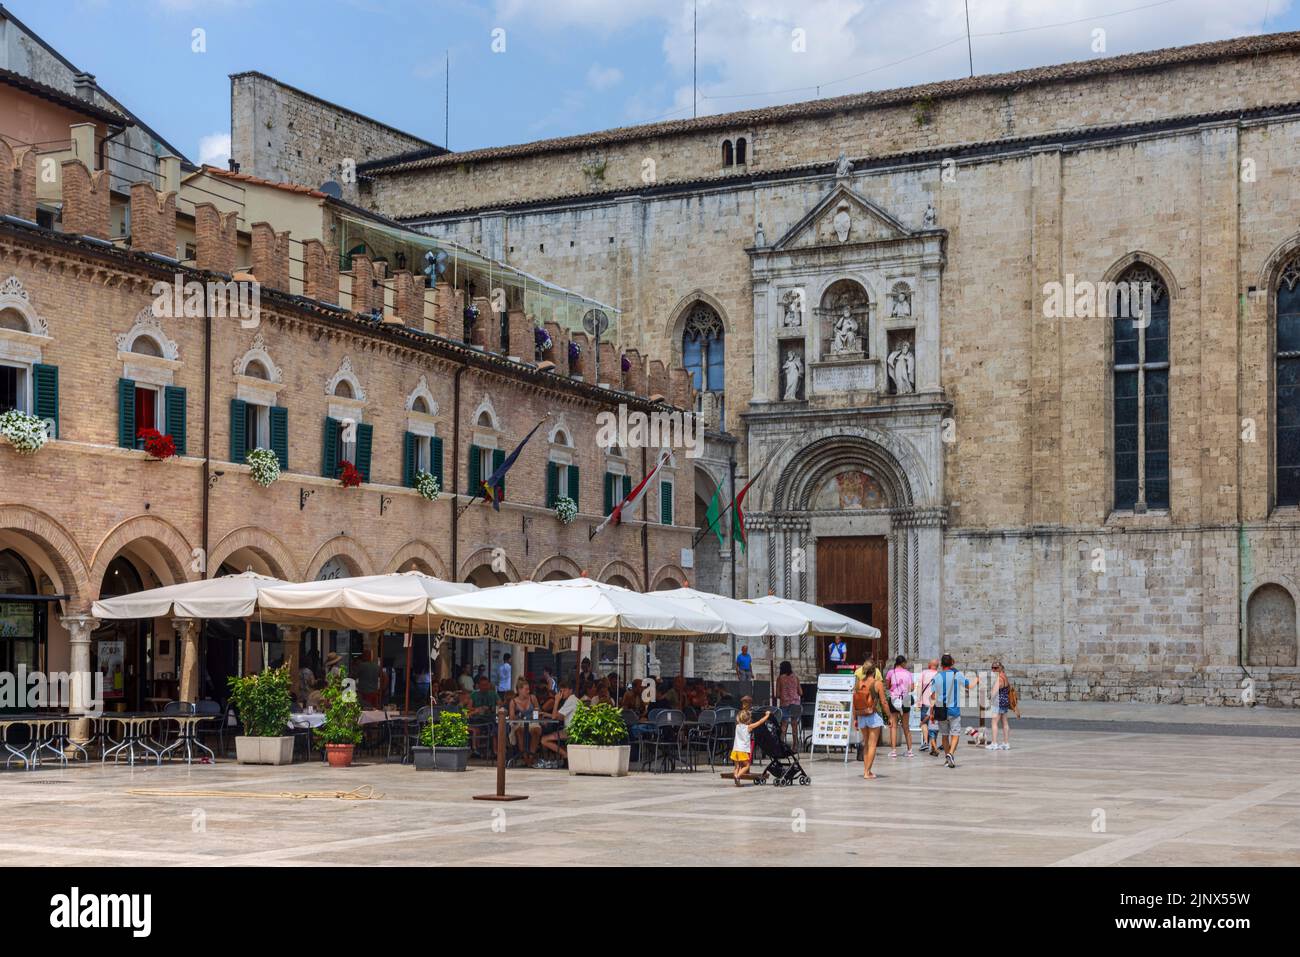 Ascoli Piceno, Marches, Italie Banque D'Images